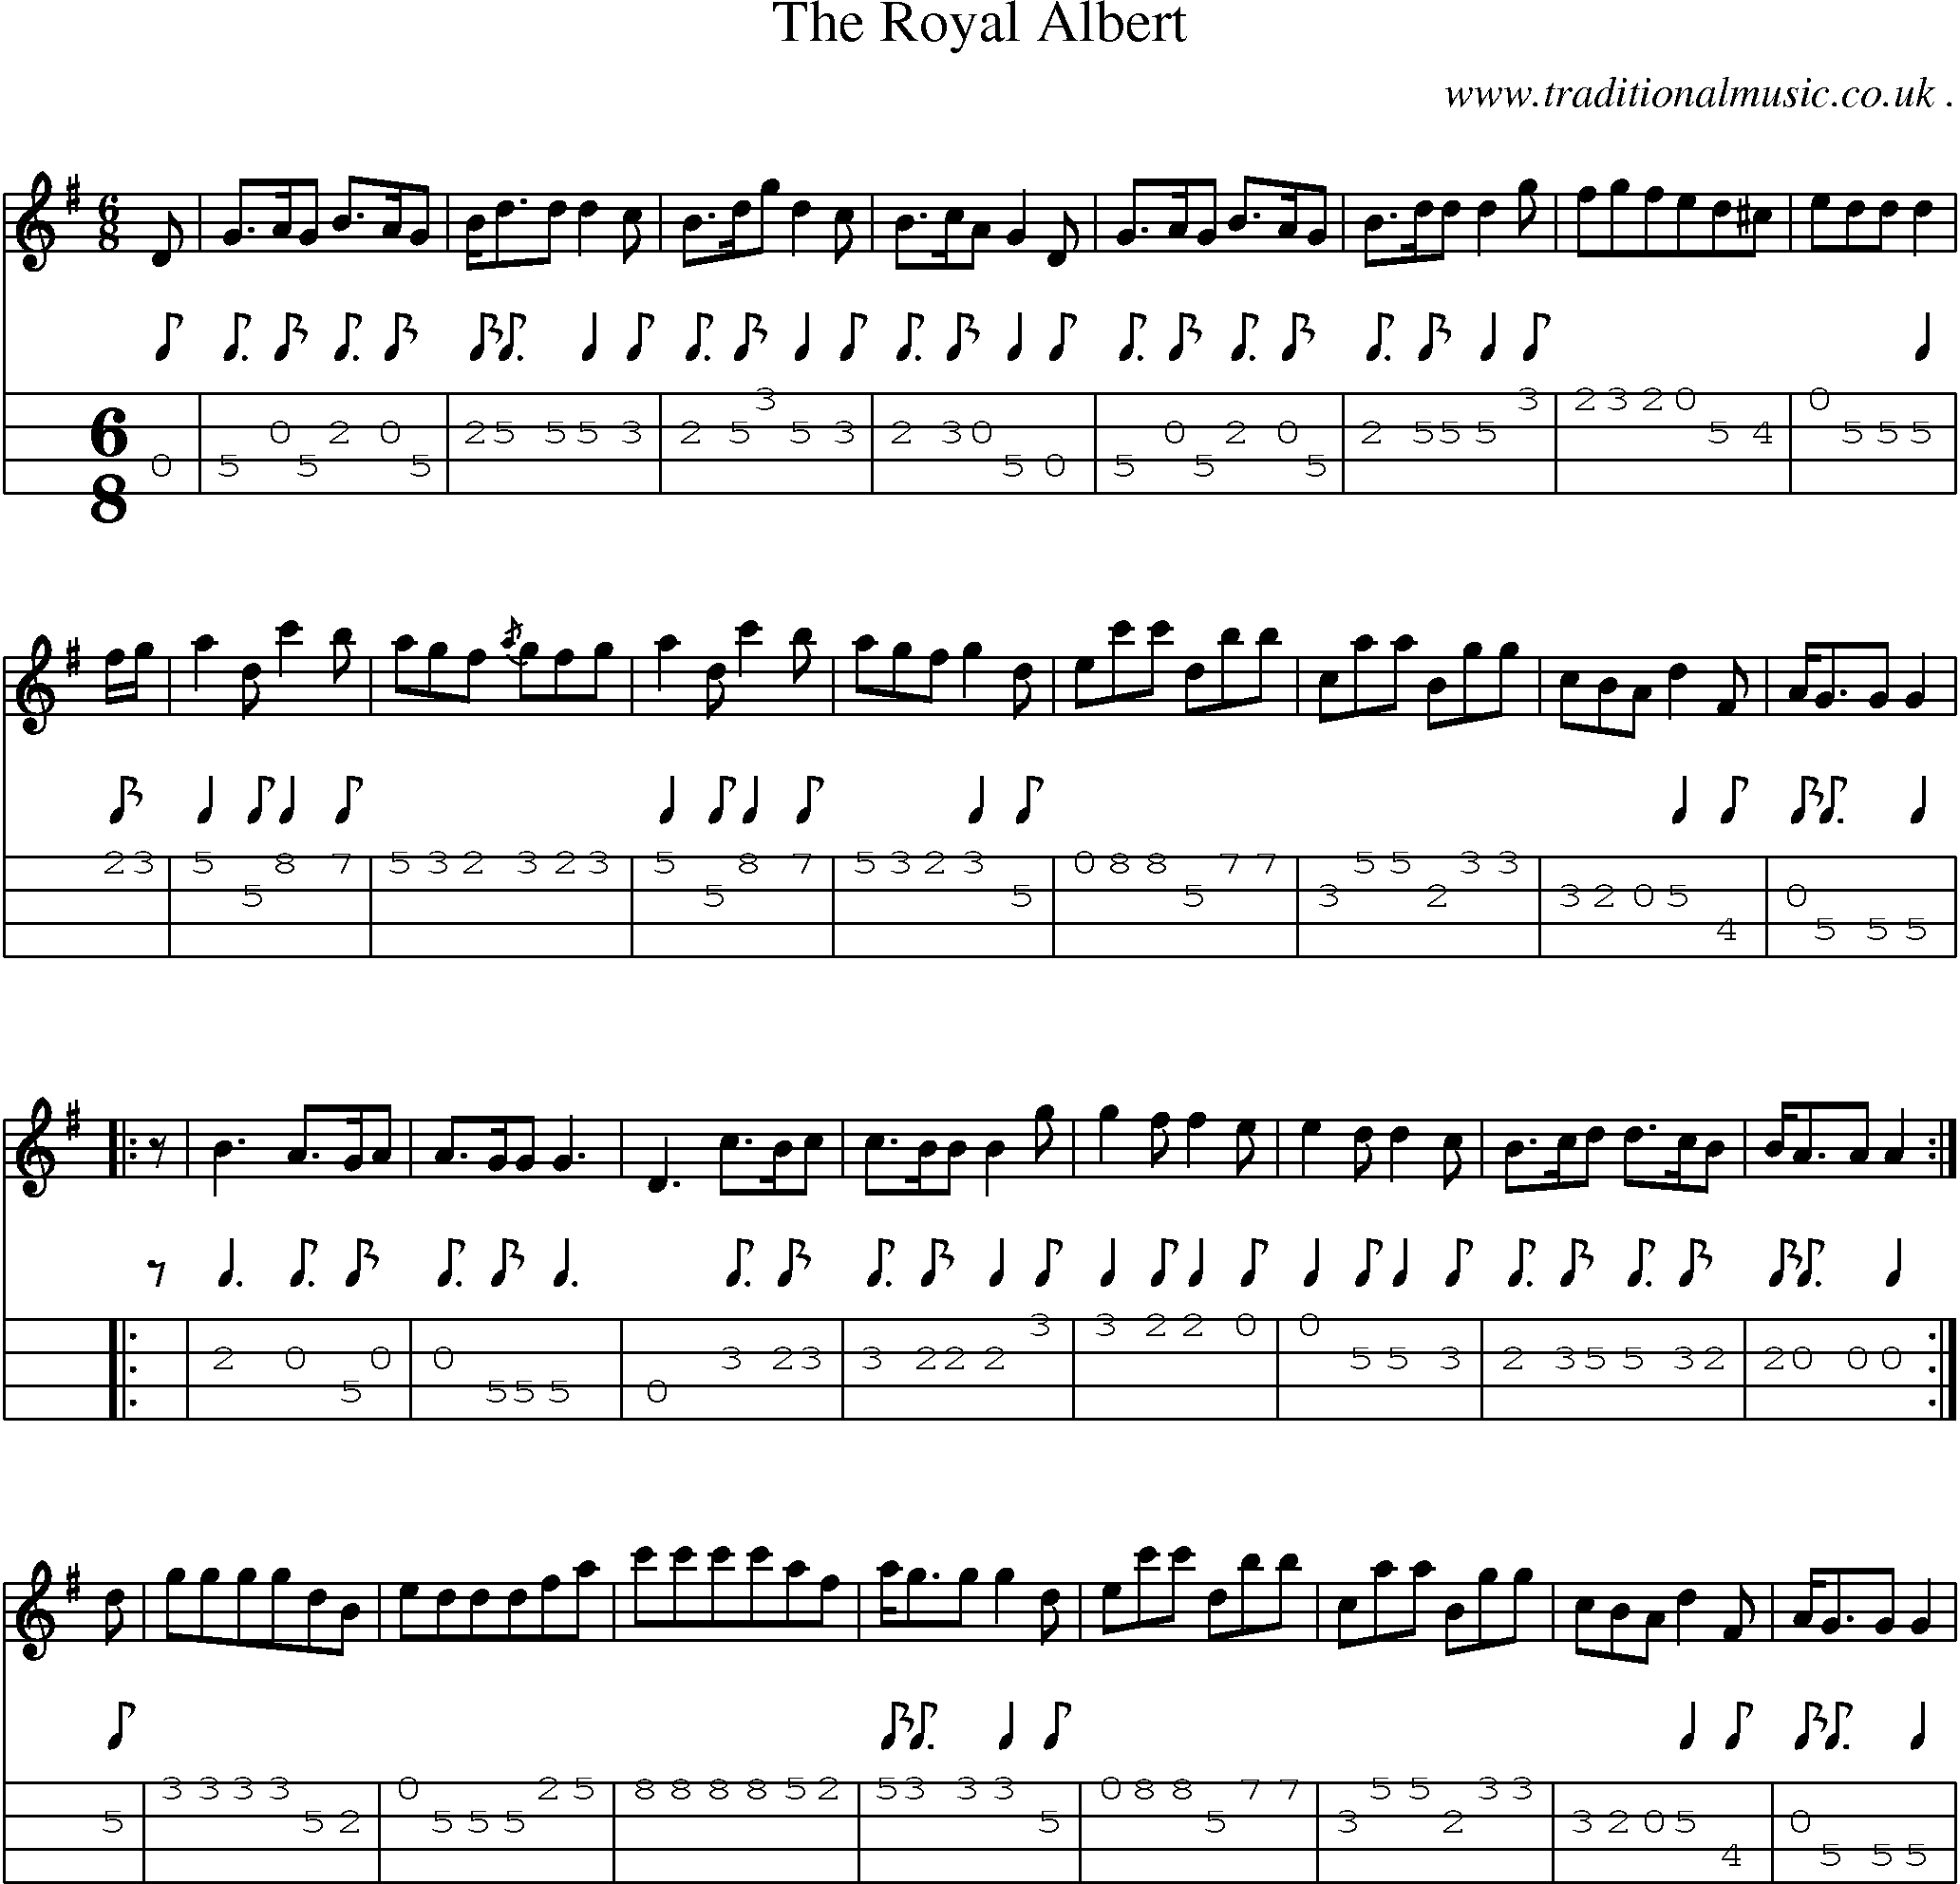 Sheet-music  score, Chords and Mandolin Tabs for The Royal Albert